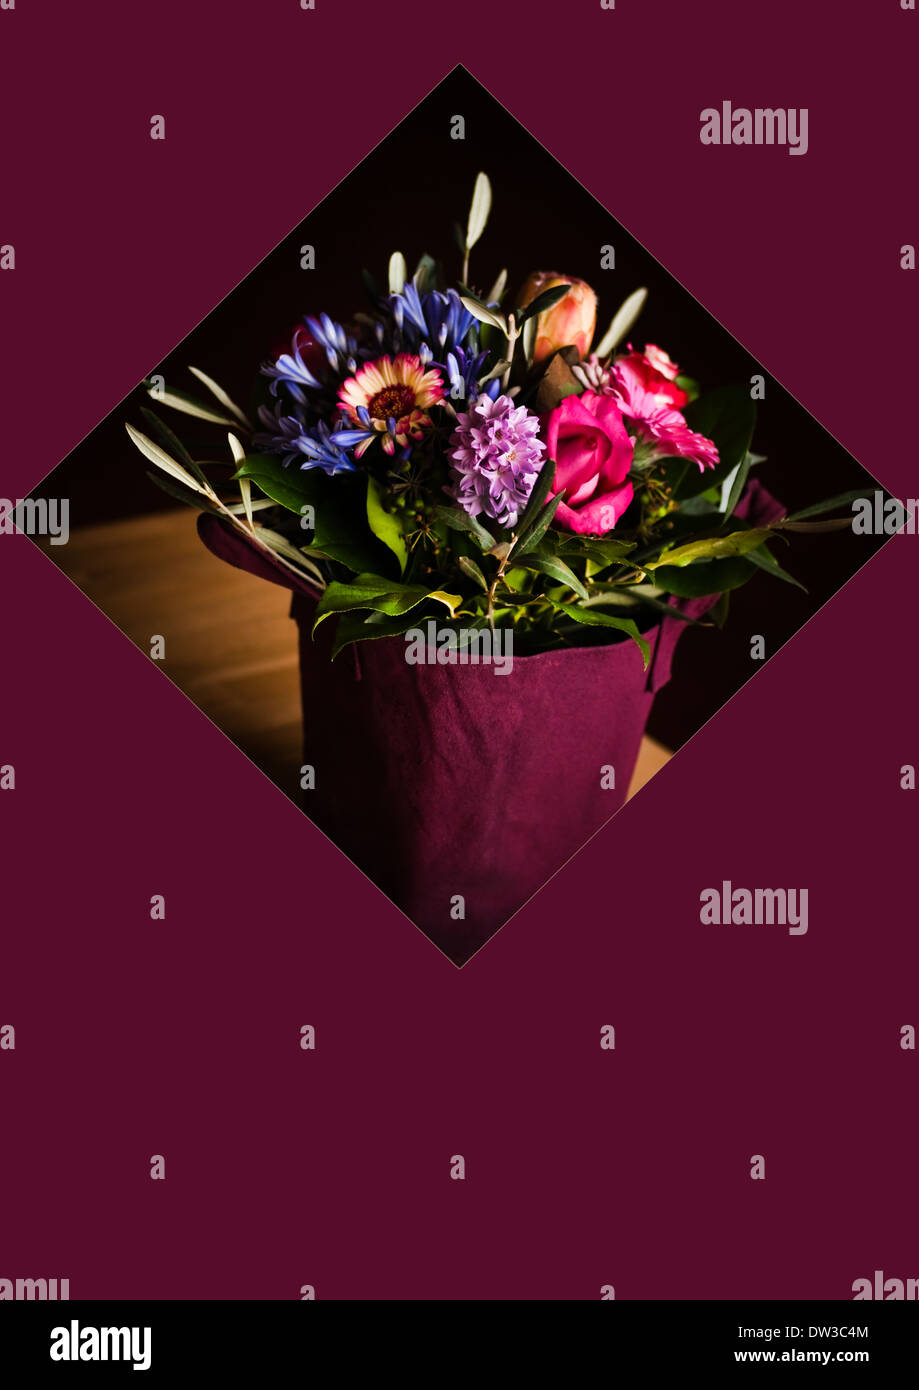 Card concept shopping bag with flowers, square window on purple background with copy space, add own text Stock Photo